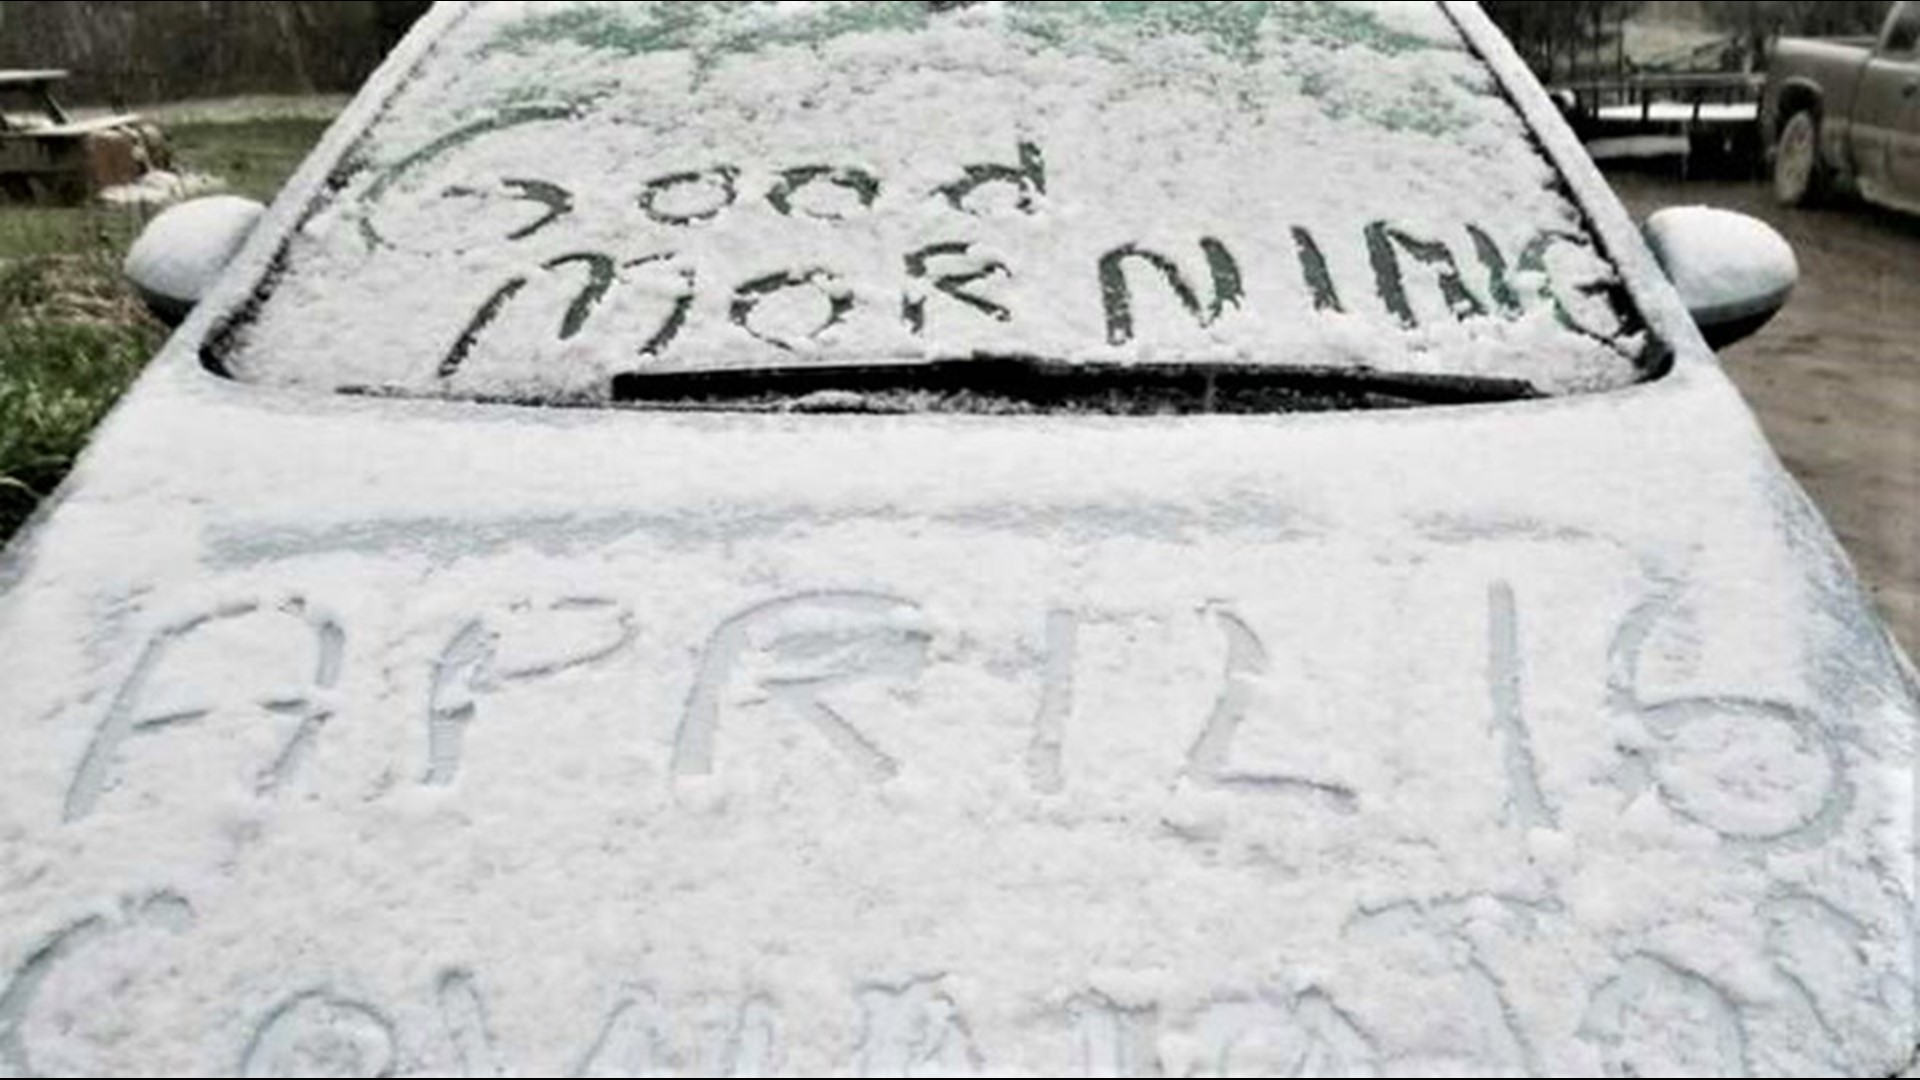 Although spring is in bloom, a light blanket of snow fell overnight in Mansfield, Pennsylvania, on April 16.